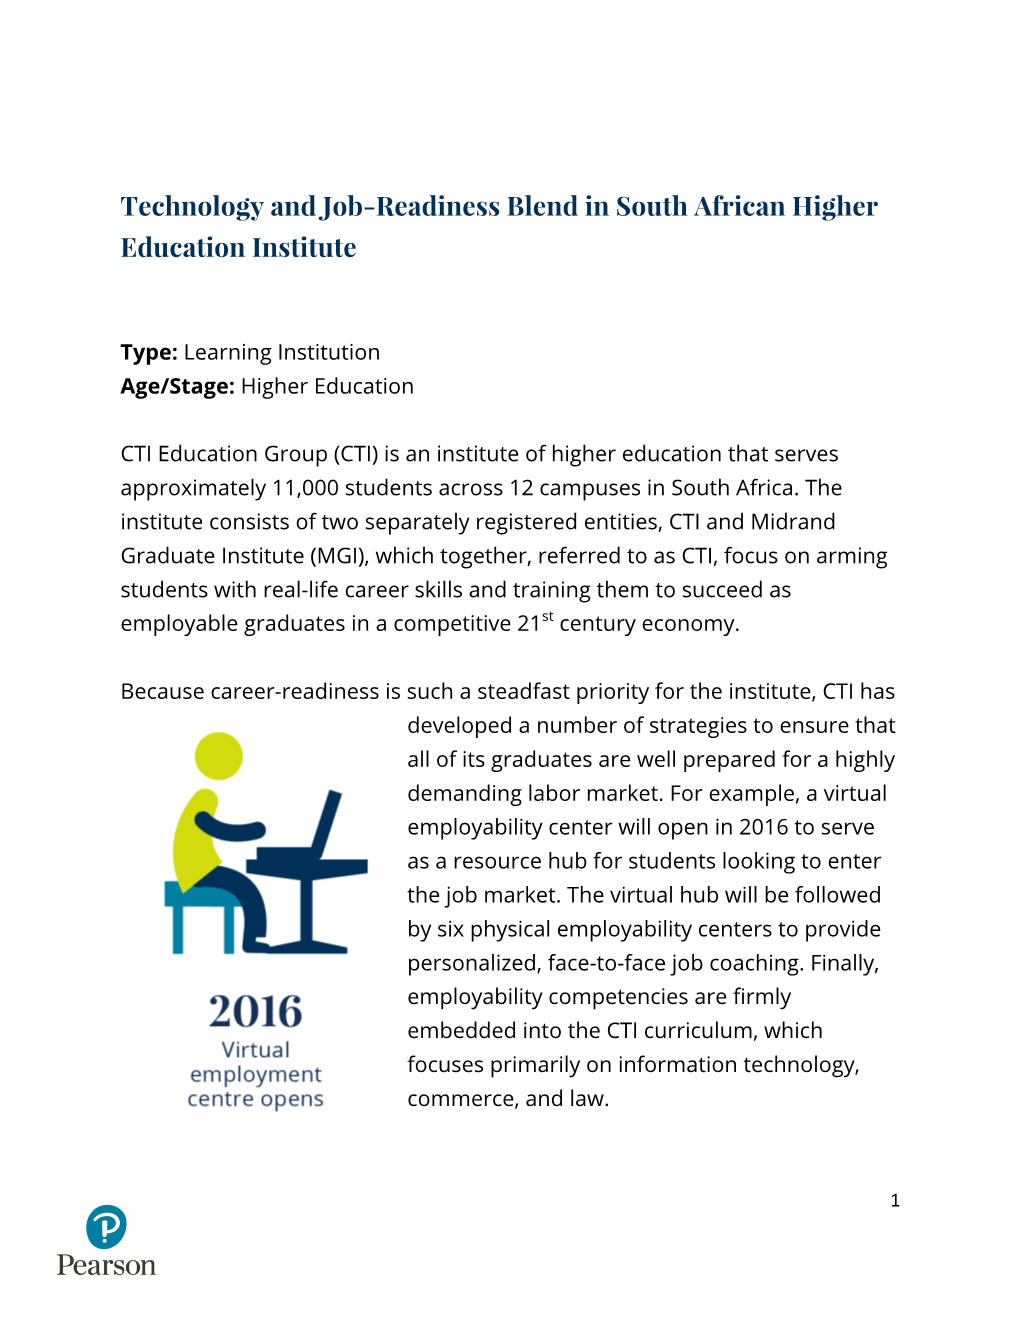 Technology and Job-Readiness Blend in South African Higher Education Institute